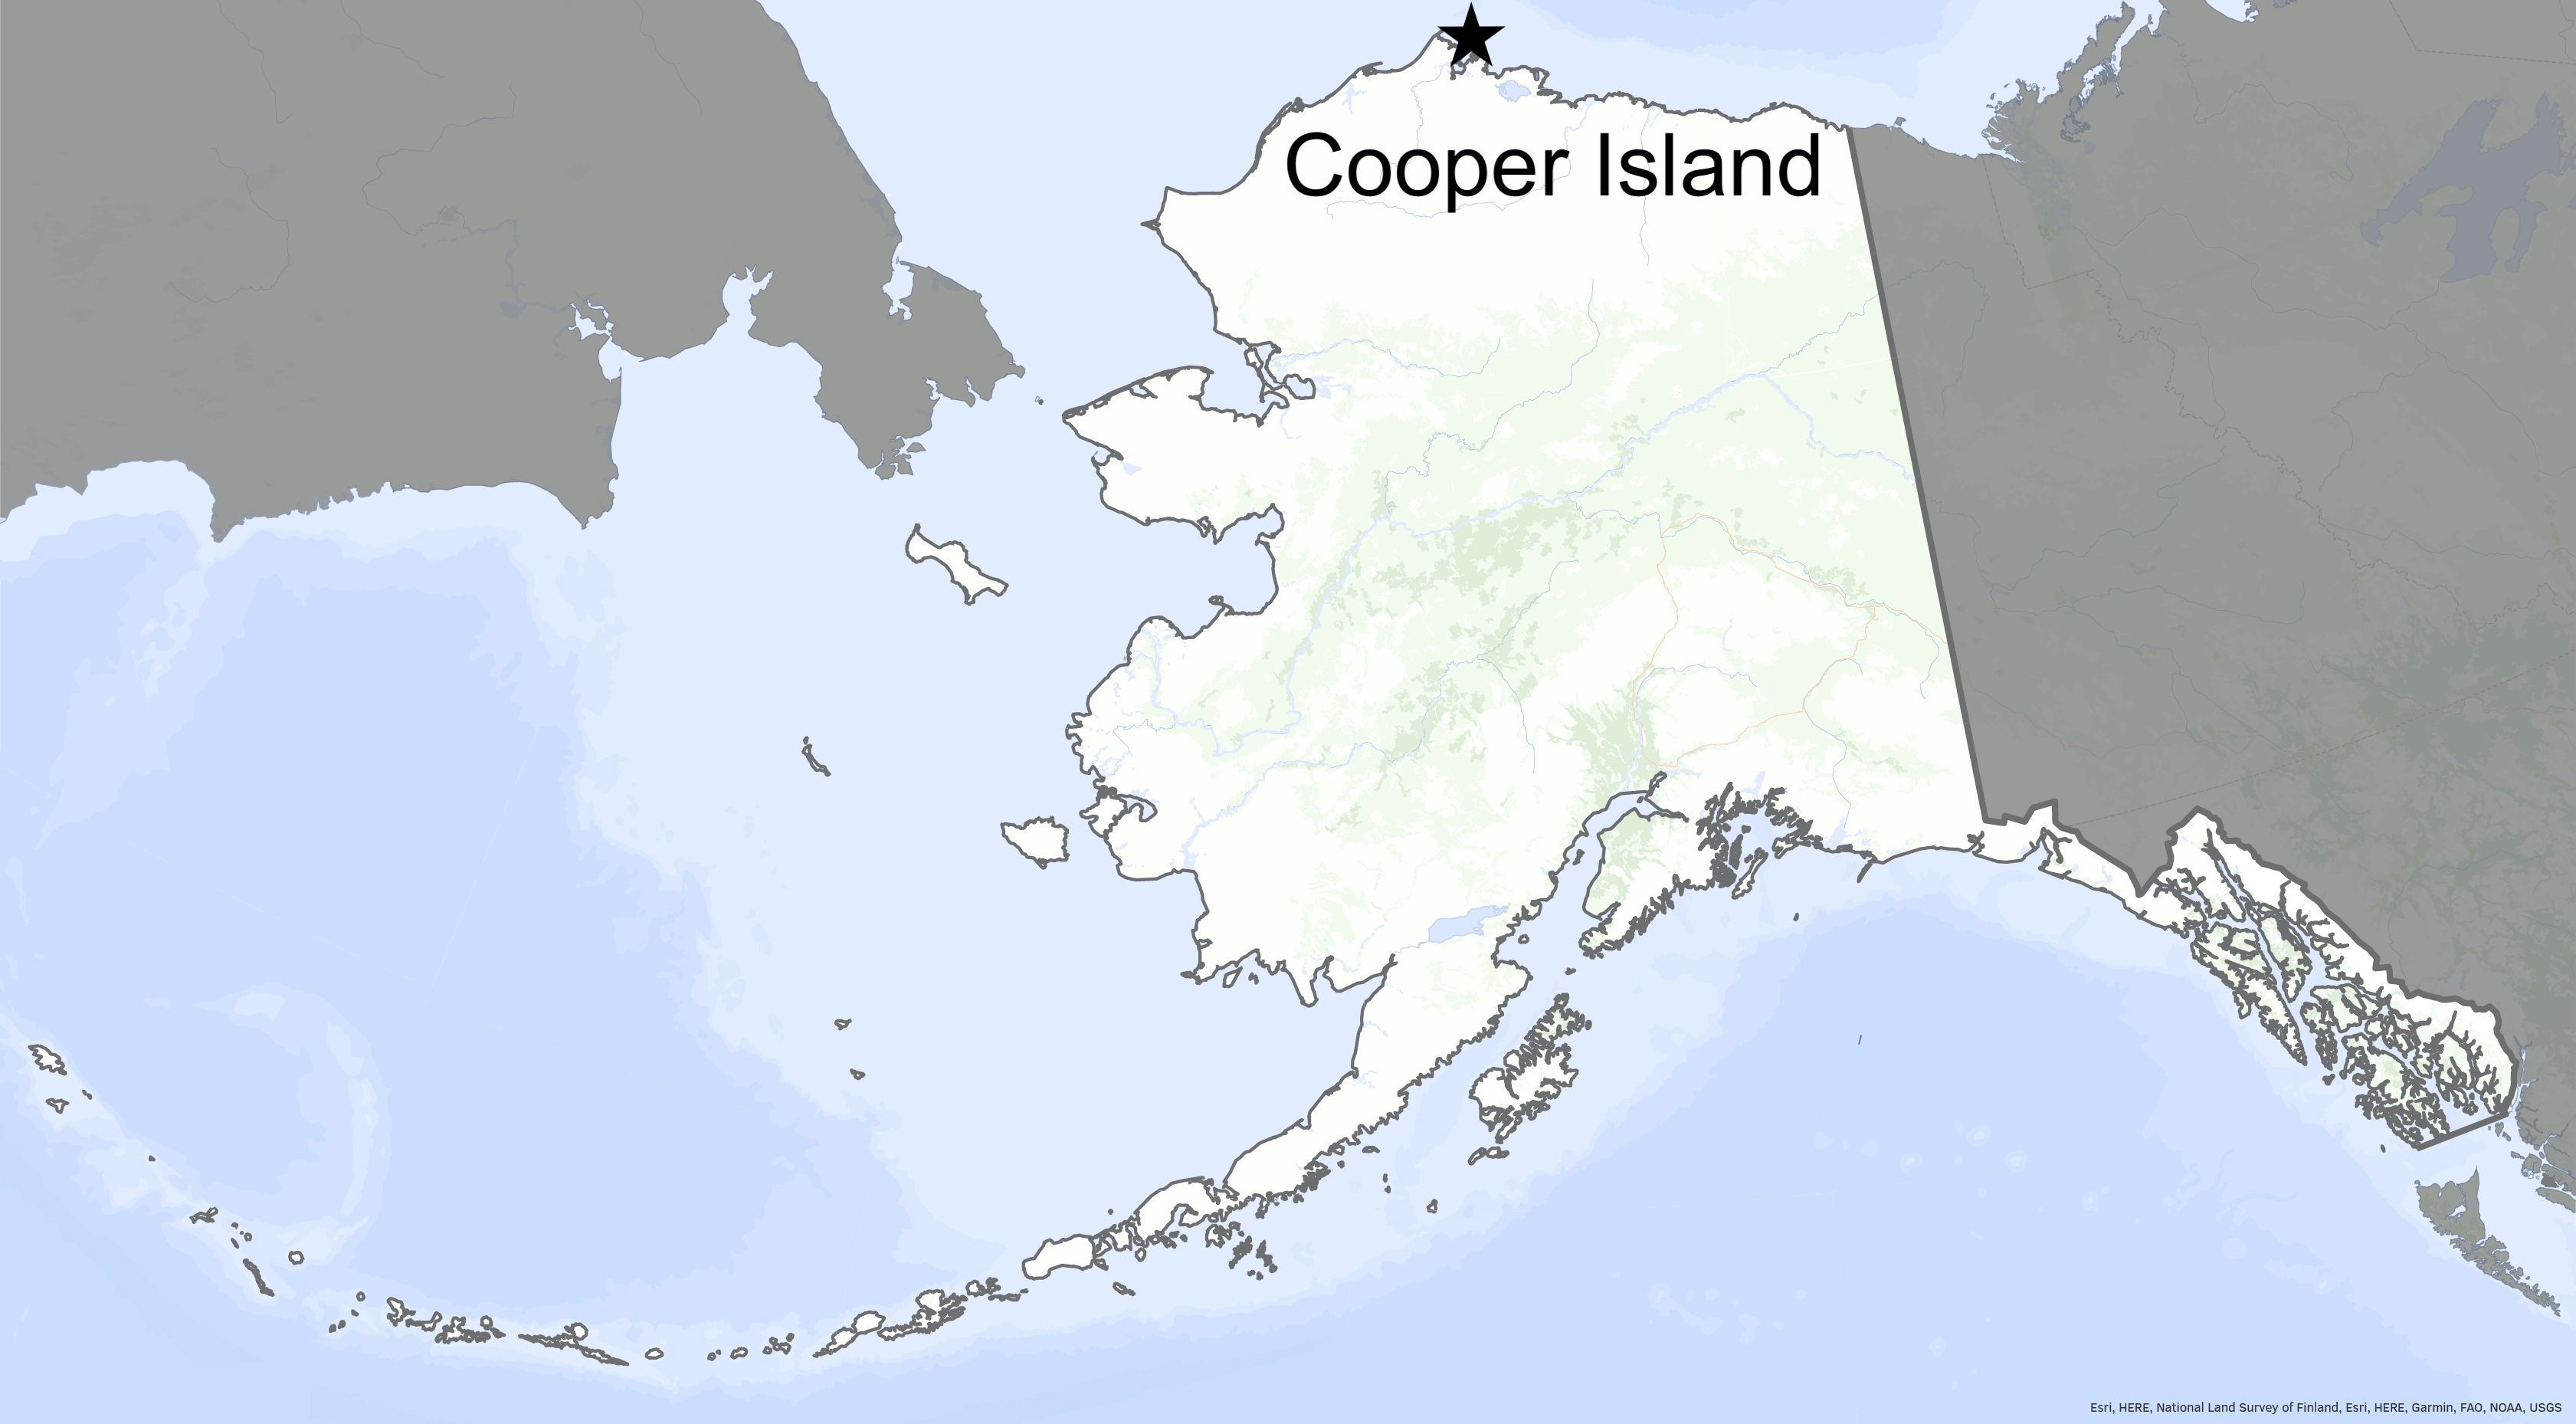 A map of Alaska shows the location of Cooper Island off the northern coast.